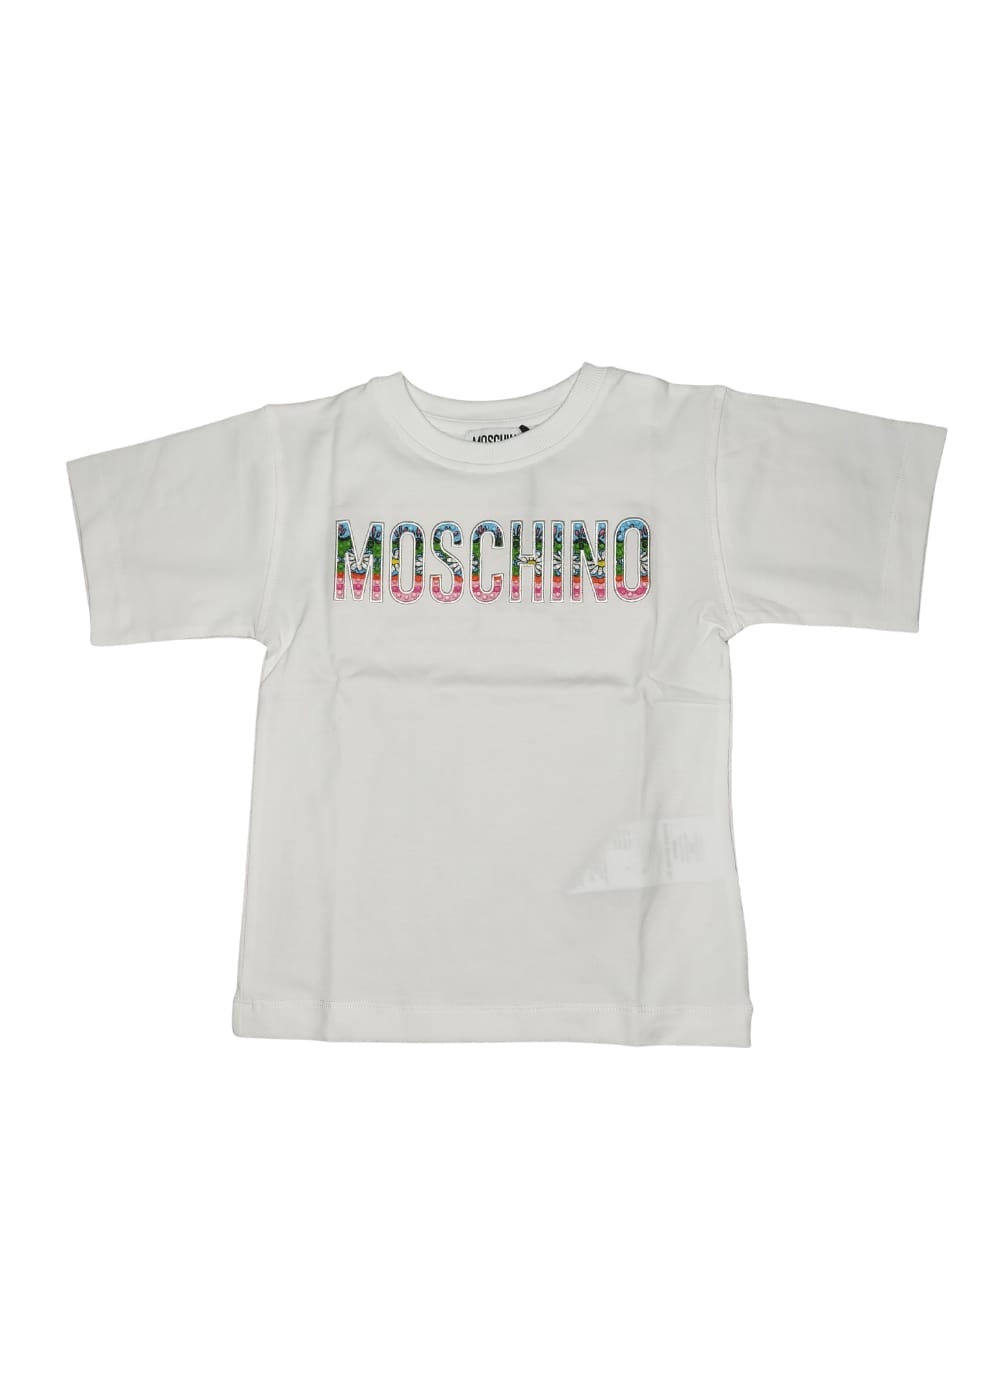 Featured image for “Moschino T-shirt Logo Strass”